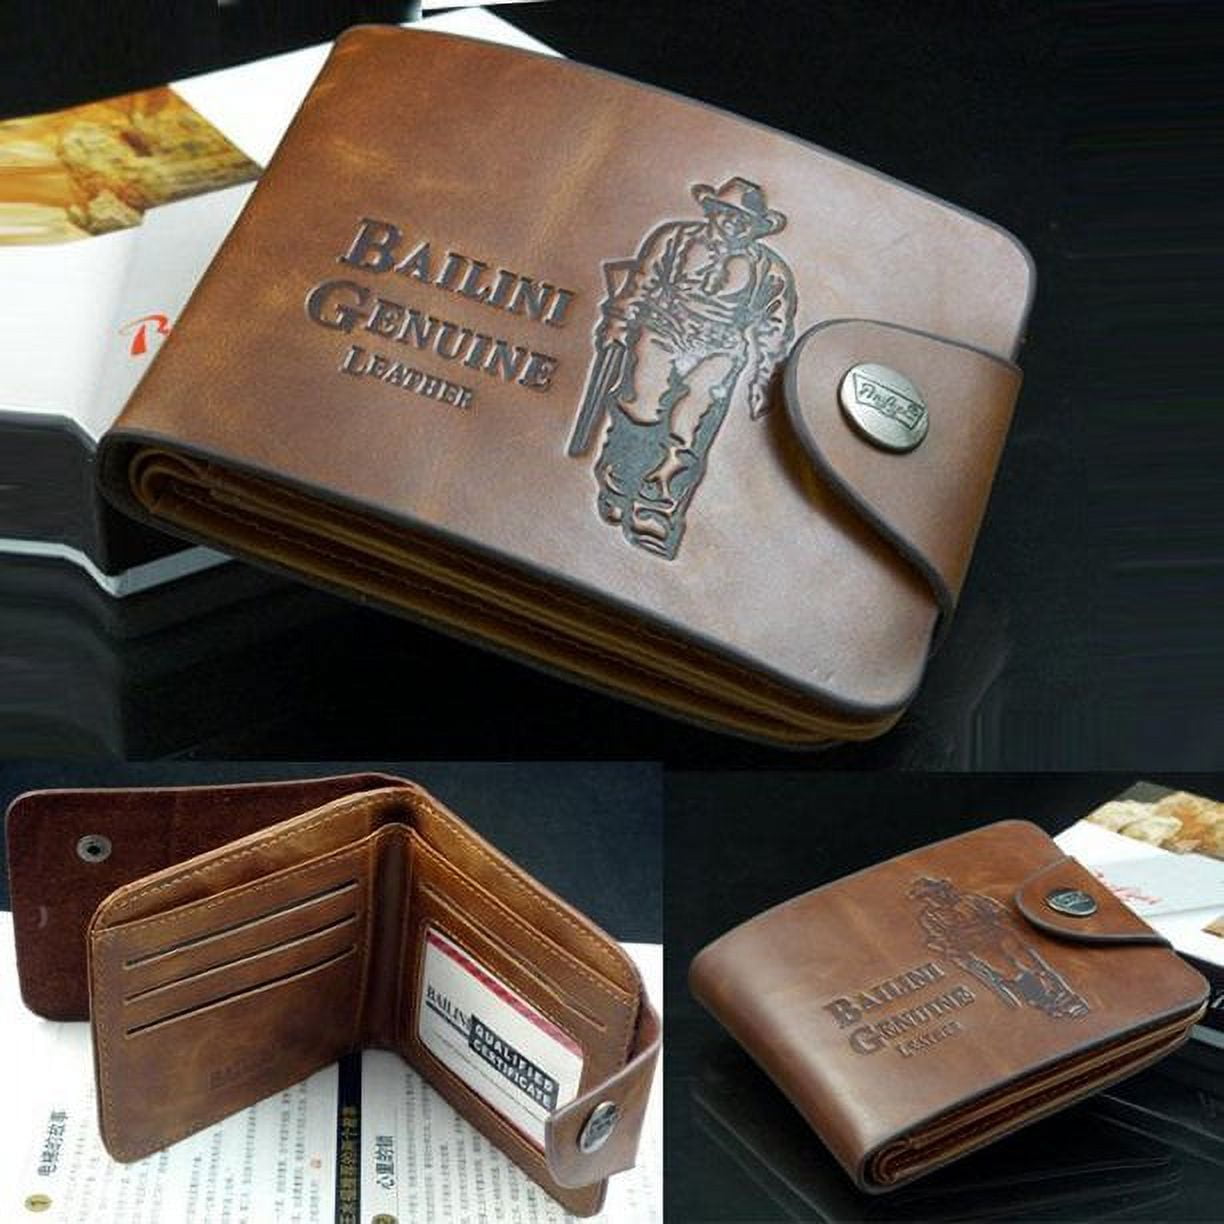 leather wallet price